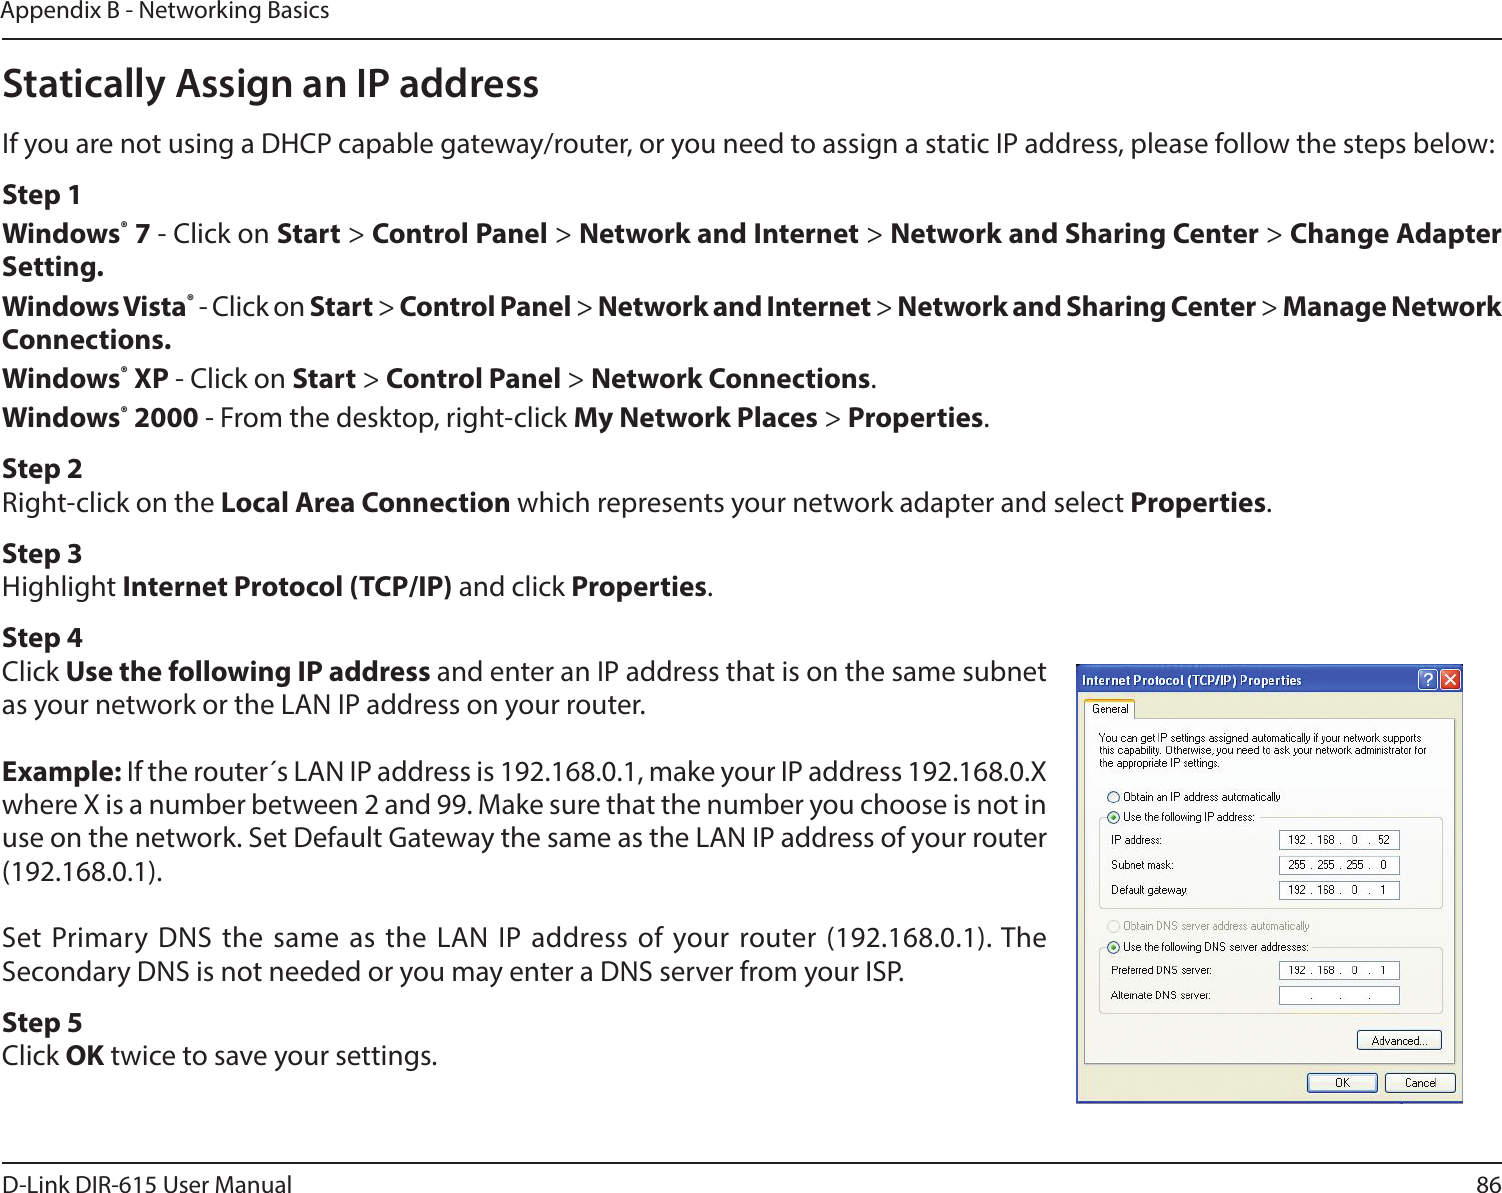 86D-Link DIR-615 User ManualAppendix B - Networking BasicsStatically Assign an IP addressIf you are not using a DHCP capable gateway/router, or you need to assign a static IP address, please follow the steps below:Step 1Windows® 7 - Click on Start &gt; Control Panel &gt; Network and Internet &gt; Network and Sharing Center &gt; Change Adapter Setting. Windows Vista® - Click on Start &gt; Control Panel &gt; Network and Internet &gt; Network and Sharing Center &gt; Manage Network Connections.Windows® XP - Click on Start &gt; Control Panel &gt; Network Connections.Windows® 2000 - From the desktop, right-click My Network Places &gt; Properties.Step 2Right-click on the Local Area Connection which represents your network adapter and select Properties.Step 3Highlight Internet Protocol (TCP/IP) and click Properties.Step 4Click Use the following IP address and enter an IP address that is on the same subnet as your network or the LAN IP address on your router.Example: If the router´s LAN IP address is 192.168.0.1, make your IP address 192.168.0.X where X is a number between 2 and 99. Make sure that the number you choose is not in use on the network. Set Default Gateway the same as the LAN IP address of your router (192.168.0.1). Set Primary DNS the same as the LAN IP address of your router (192.168.0.1). The Secondary DNS is not needed or you may enter a DNS server from your ISP.Step 5Click OK twice to save your settings.